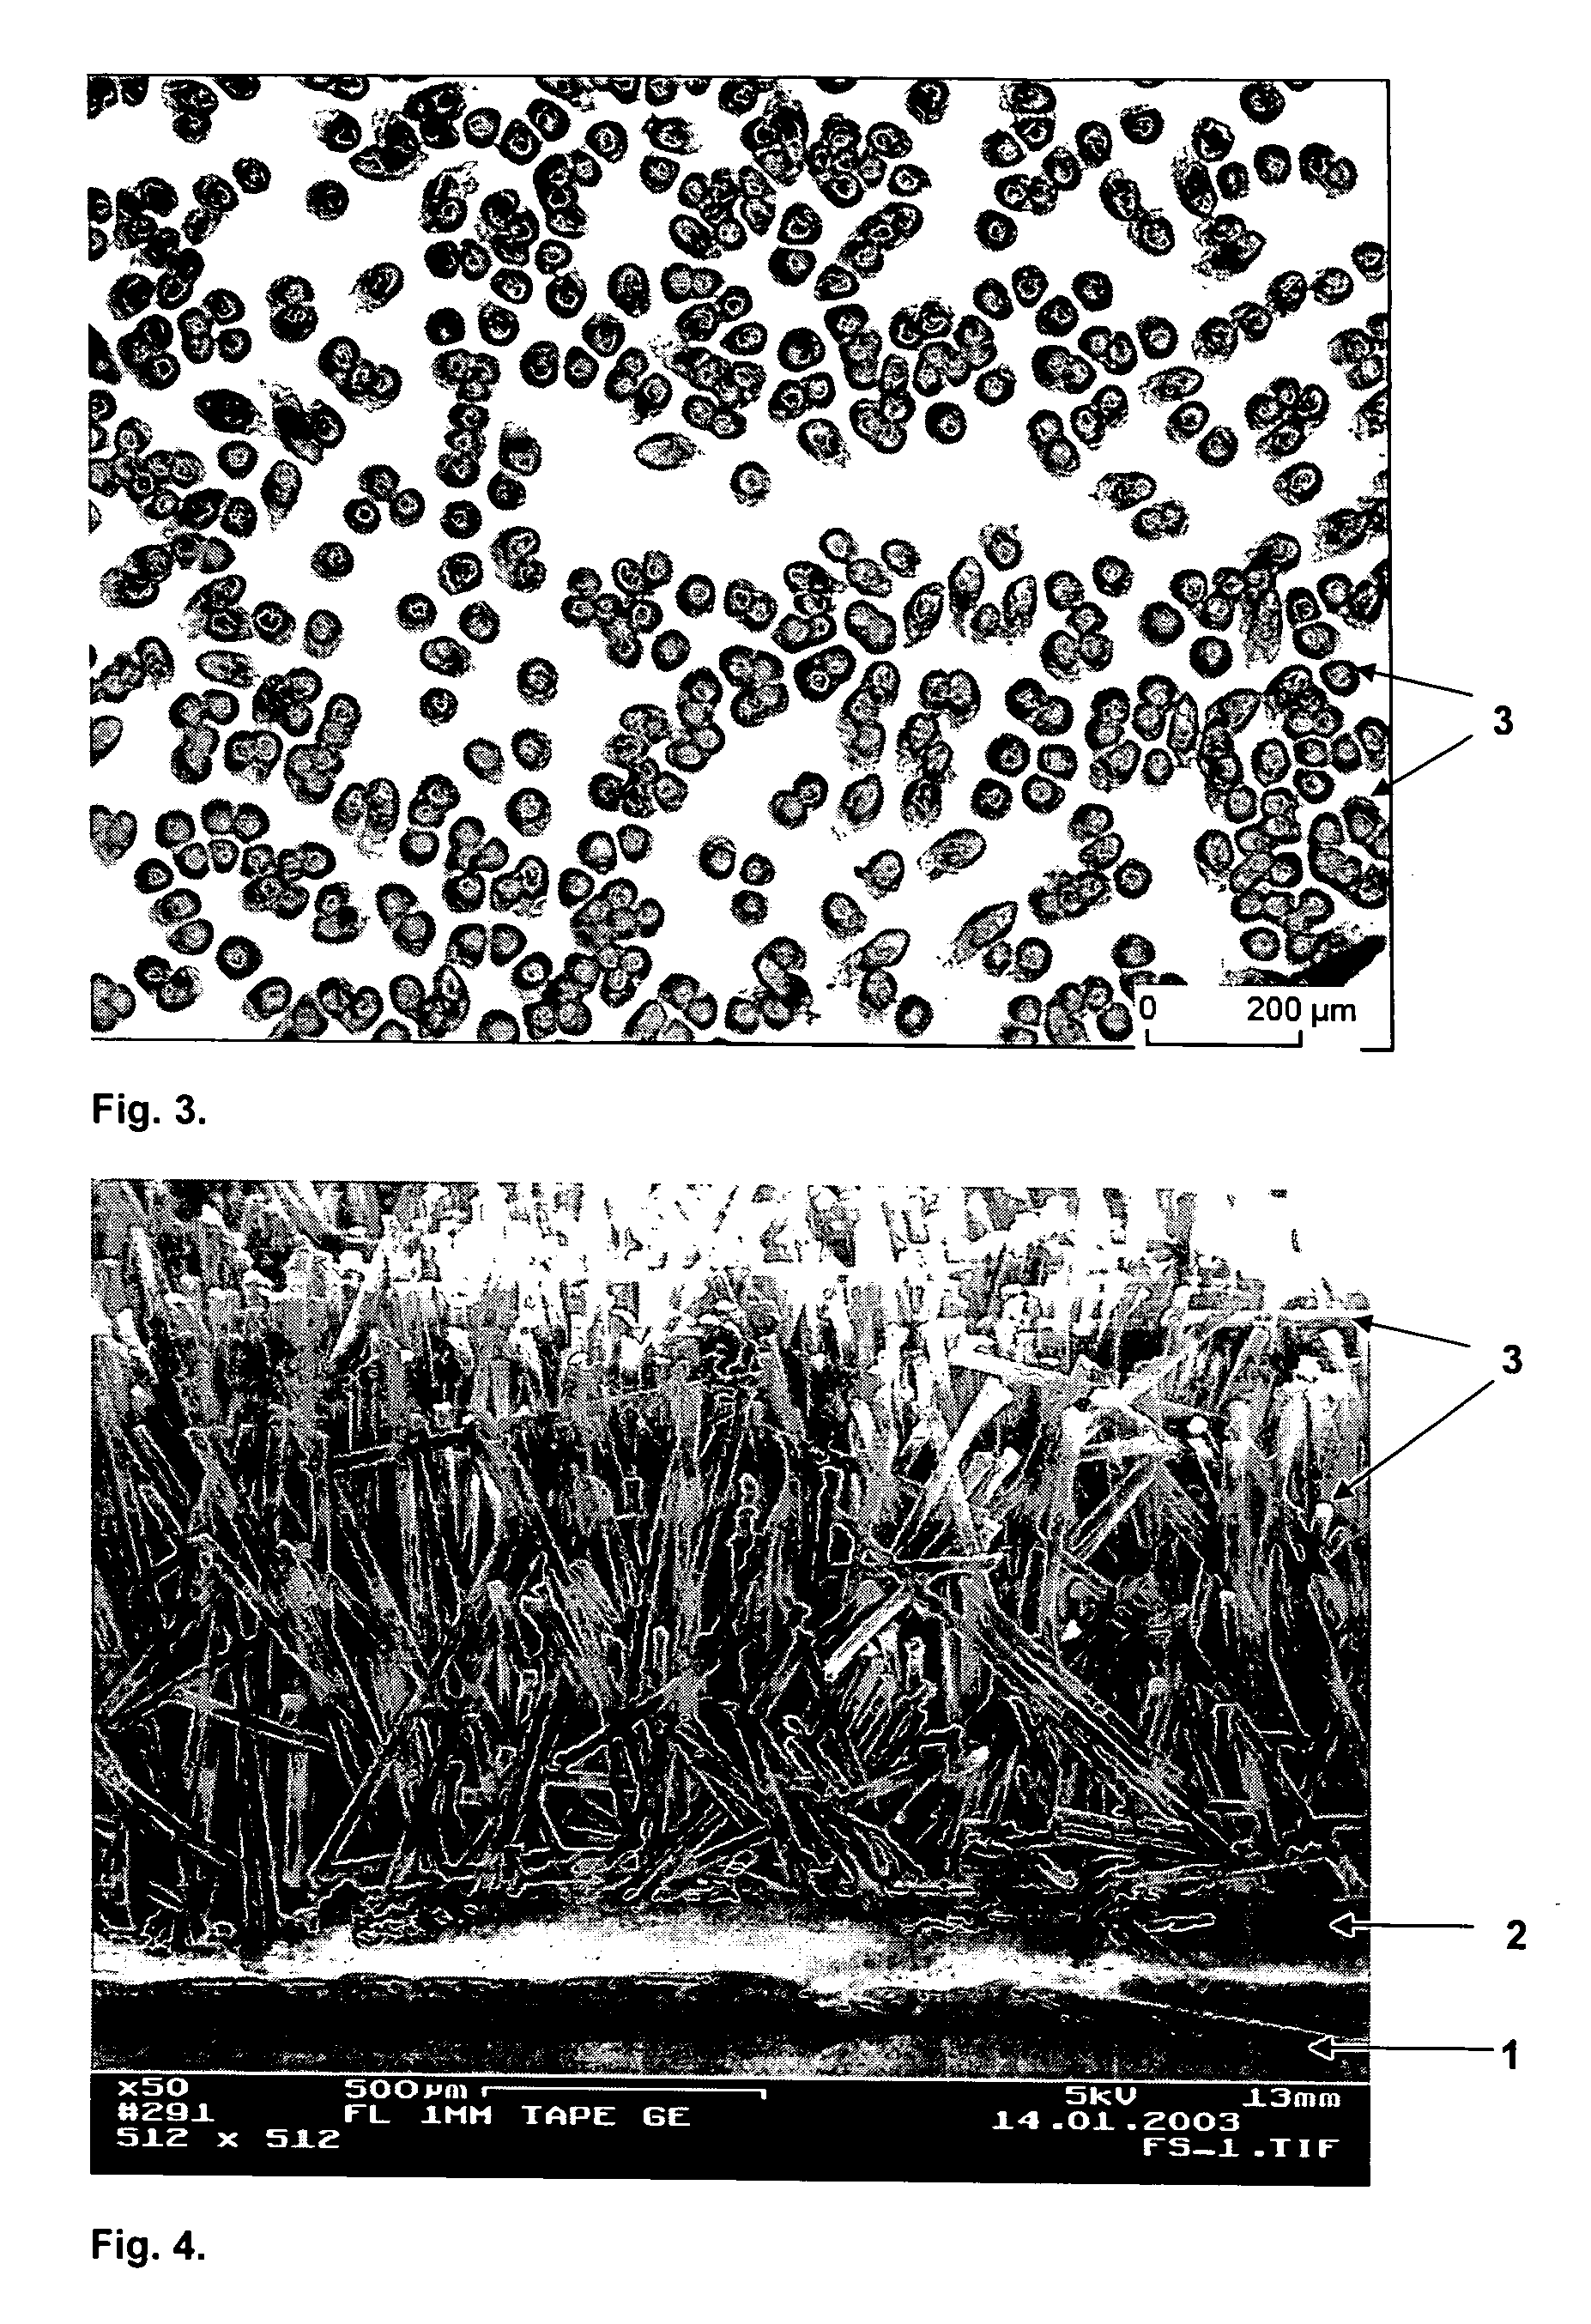 Support material for tissue engineering, for producing implants or implant materials, and an implant produced with the support material